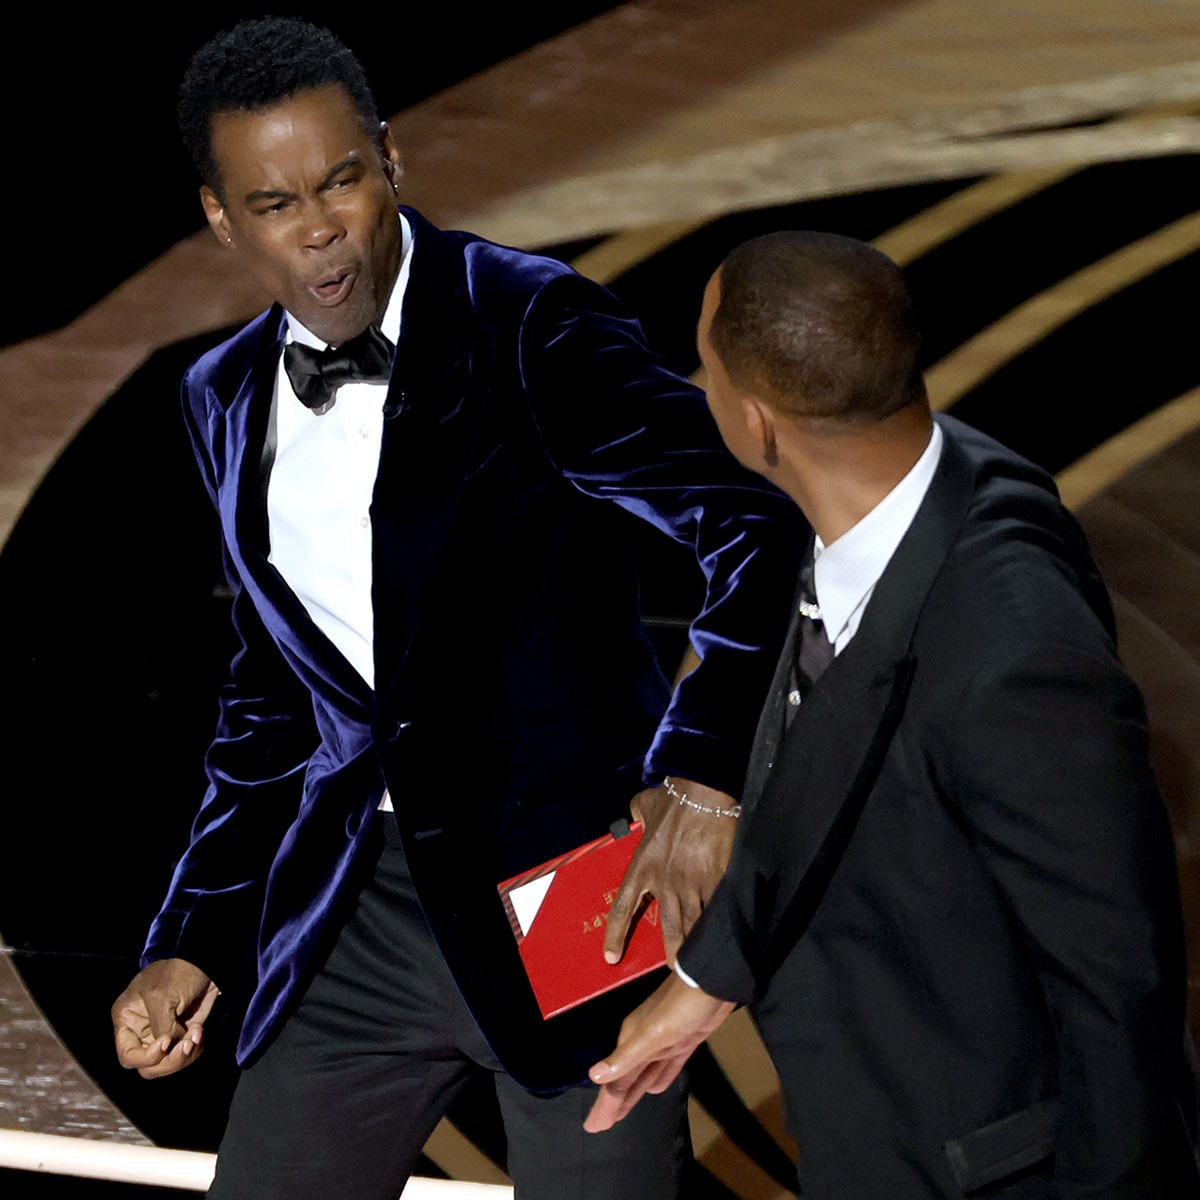 Oscars 2022: Will Smith Slaps Chris Rock After Comedian Makes Dig at Jada Pinkett Smith